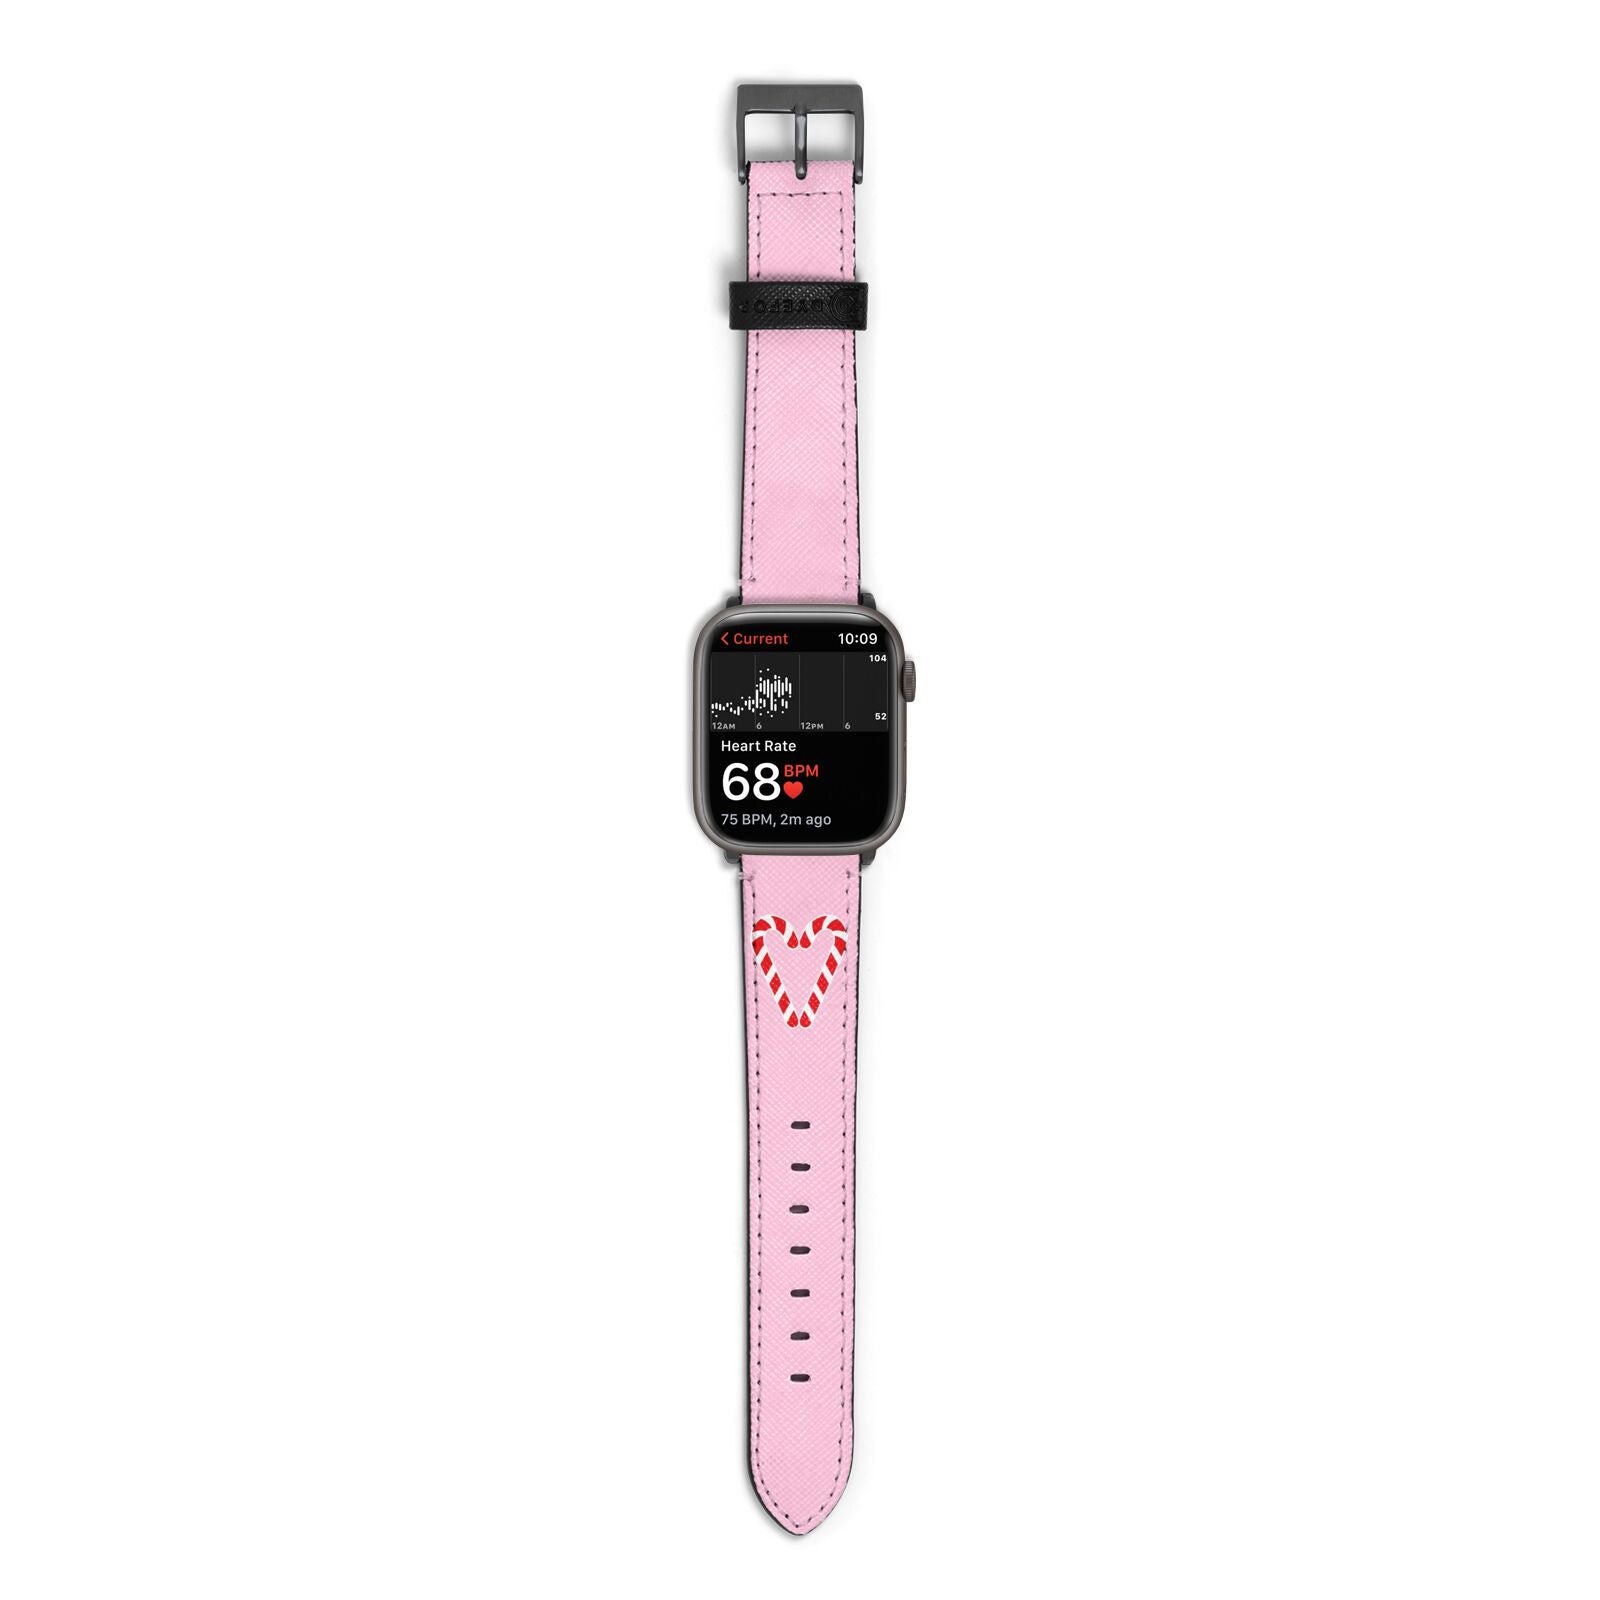 Candy Cane Heart Apple Watch Strap Size 38mm with Space Grey Hardware